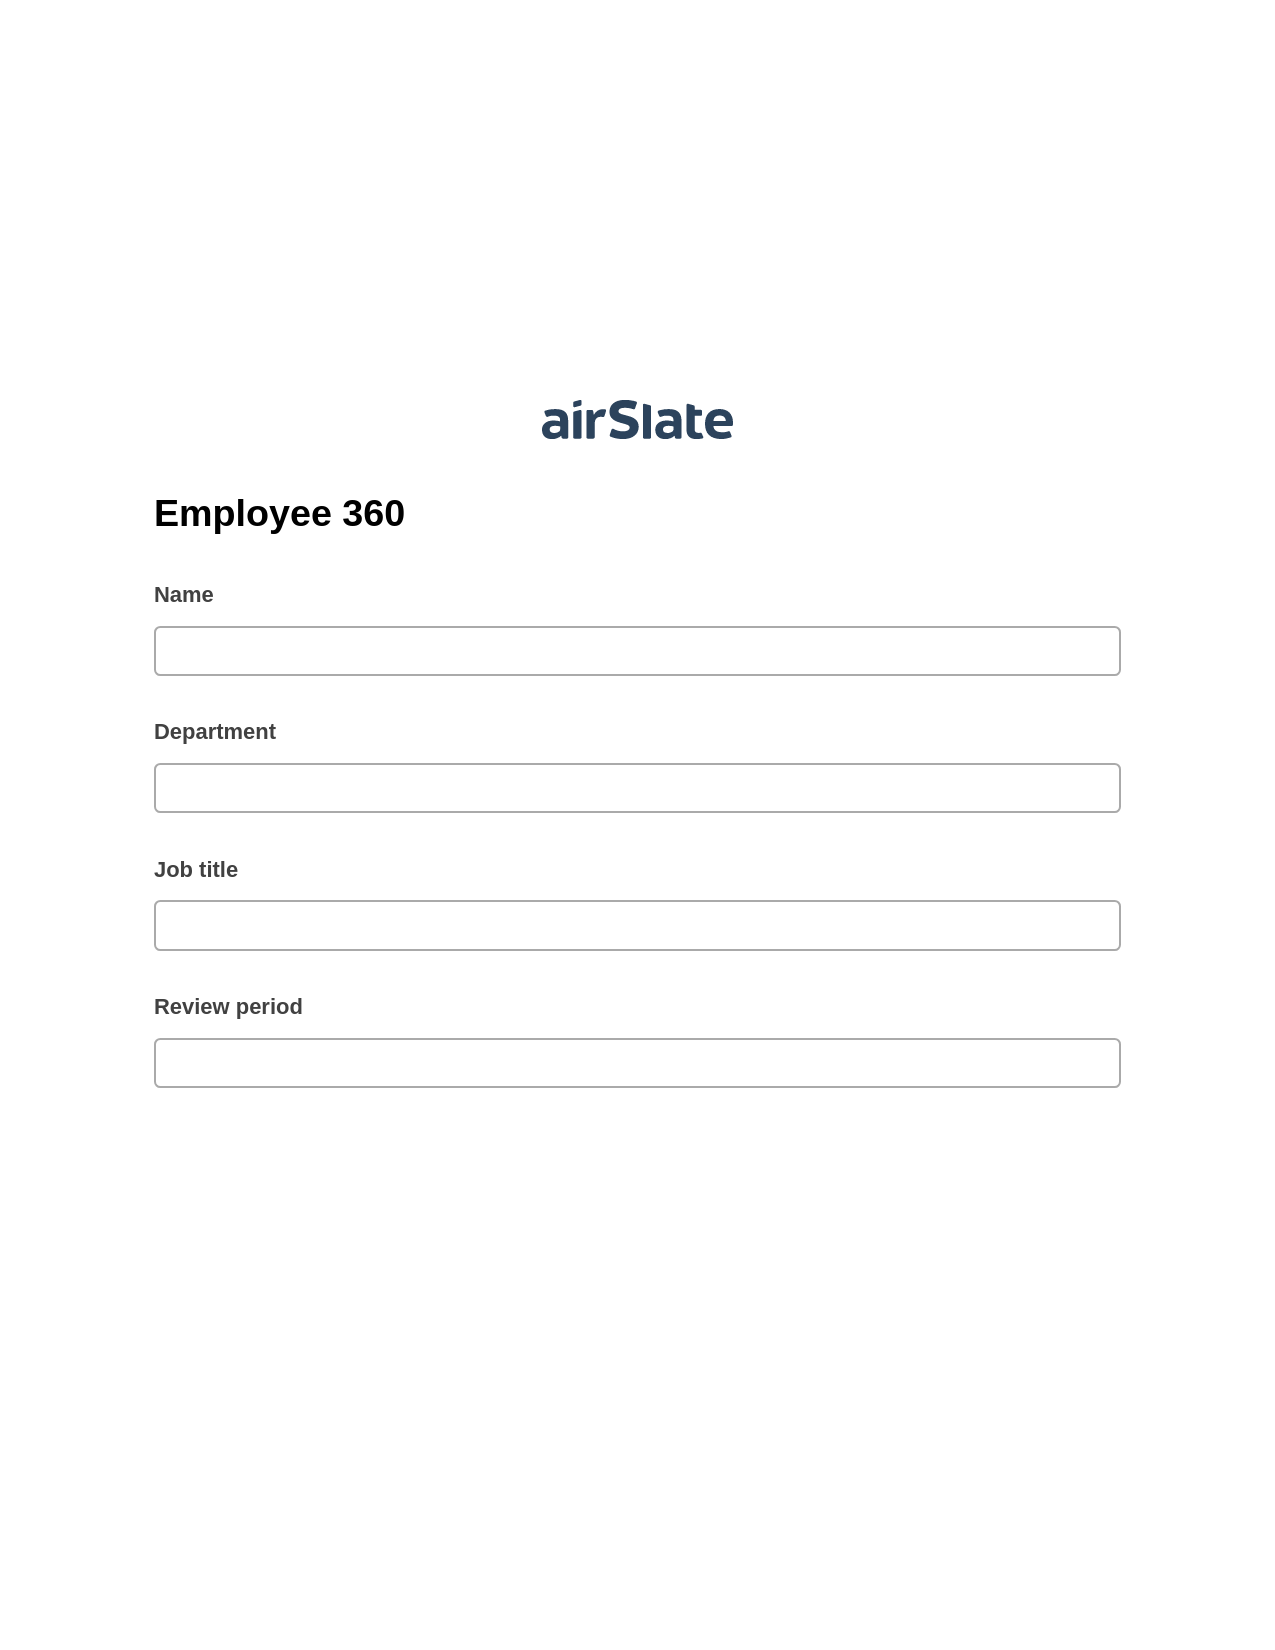 Multirole Employee 360 Pre-fill from Office 365 Excel Bot, Update MS Dynamics 365 Record Bot, Archive to SharePoint Folder Bot